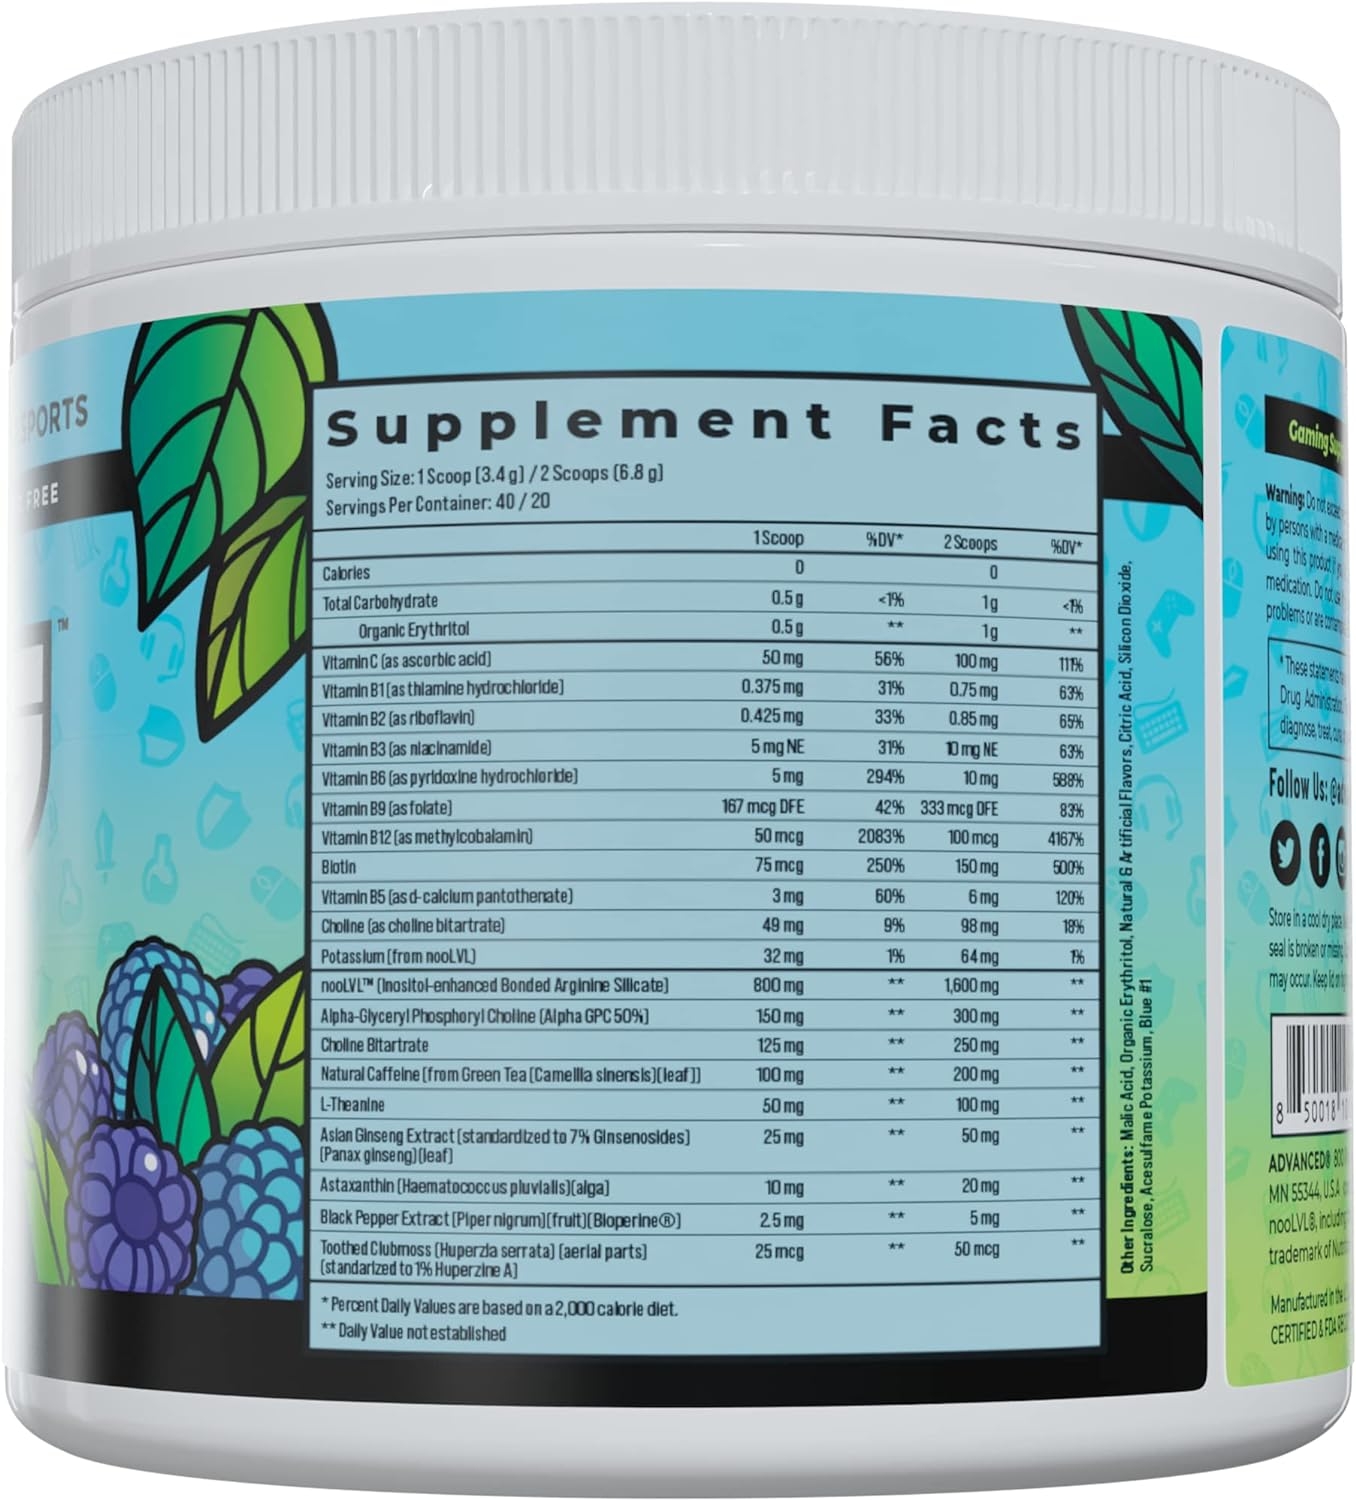 Focus by ADVANCED | Focus and Concentration Formula with NooLVL | Mental Clarity & Energy Boost for Gaming, Work & Study | Sugar Free & Keto Friendly | (40 Servings) (Blue Raspberry)